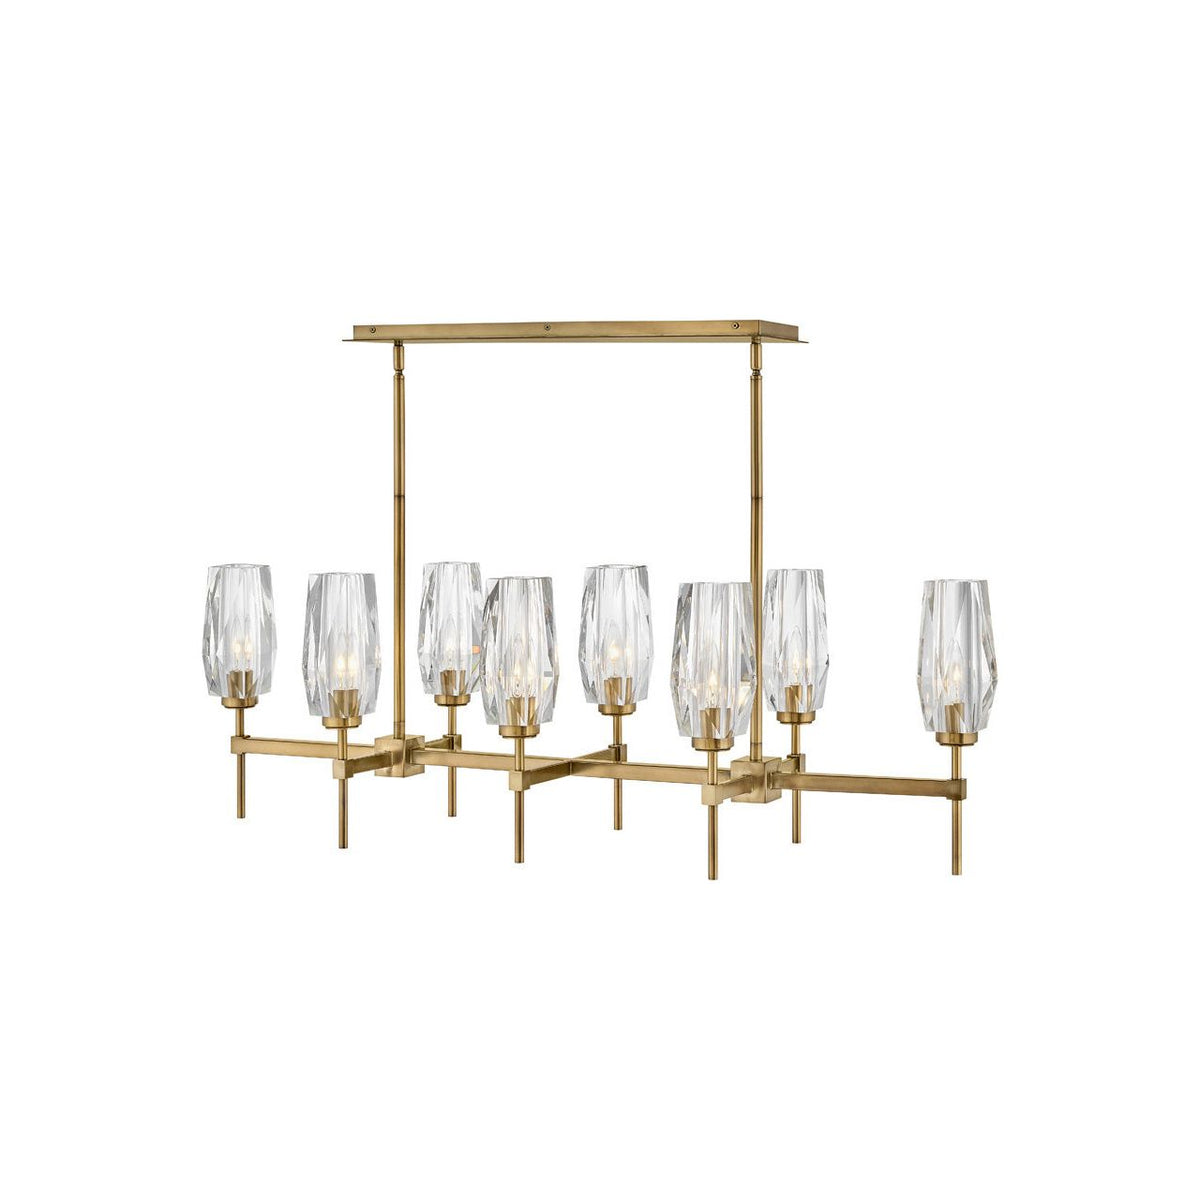 Hinkley Canada - 38256HB - LED Linear Chandelier - Ana - Heritage Brass